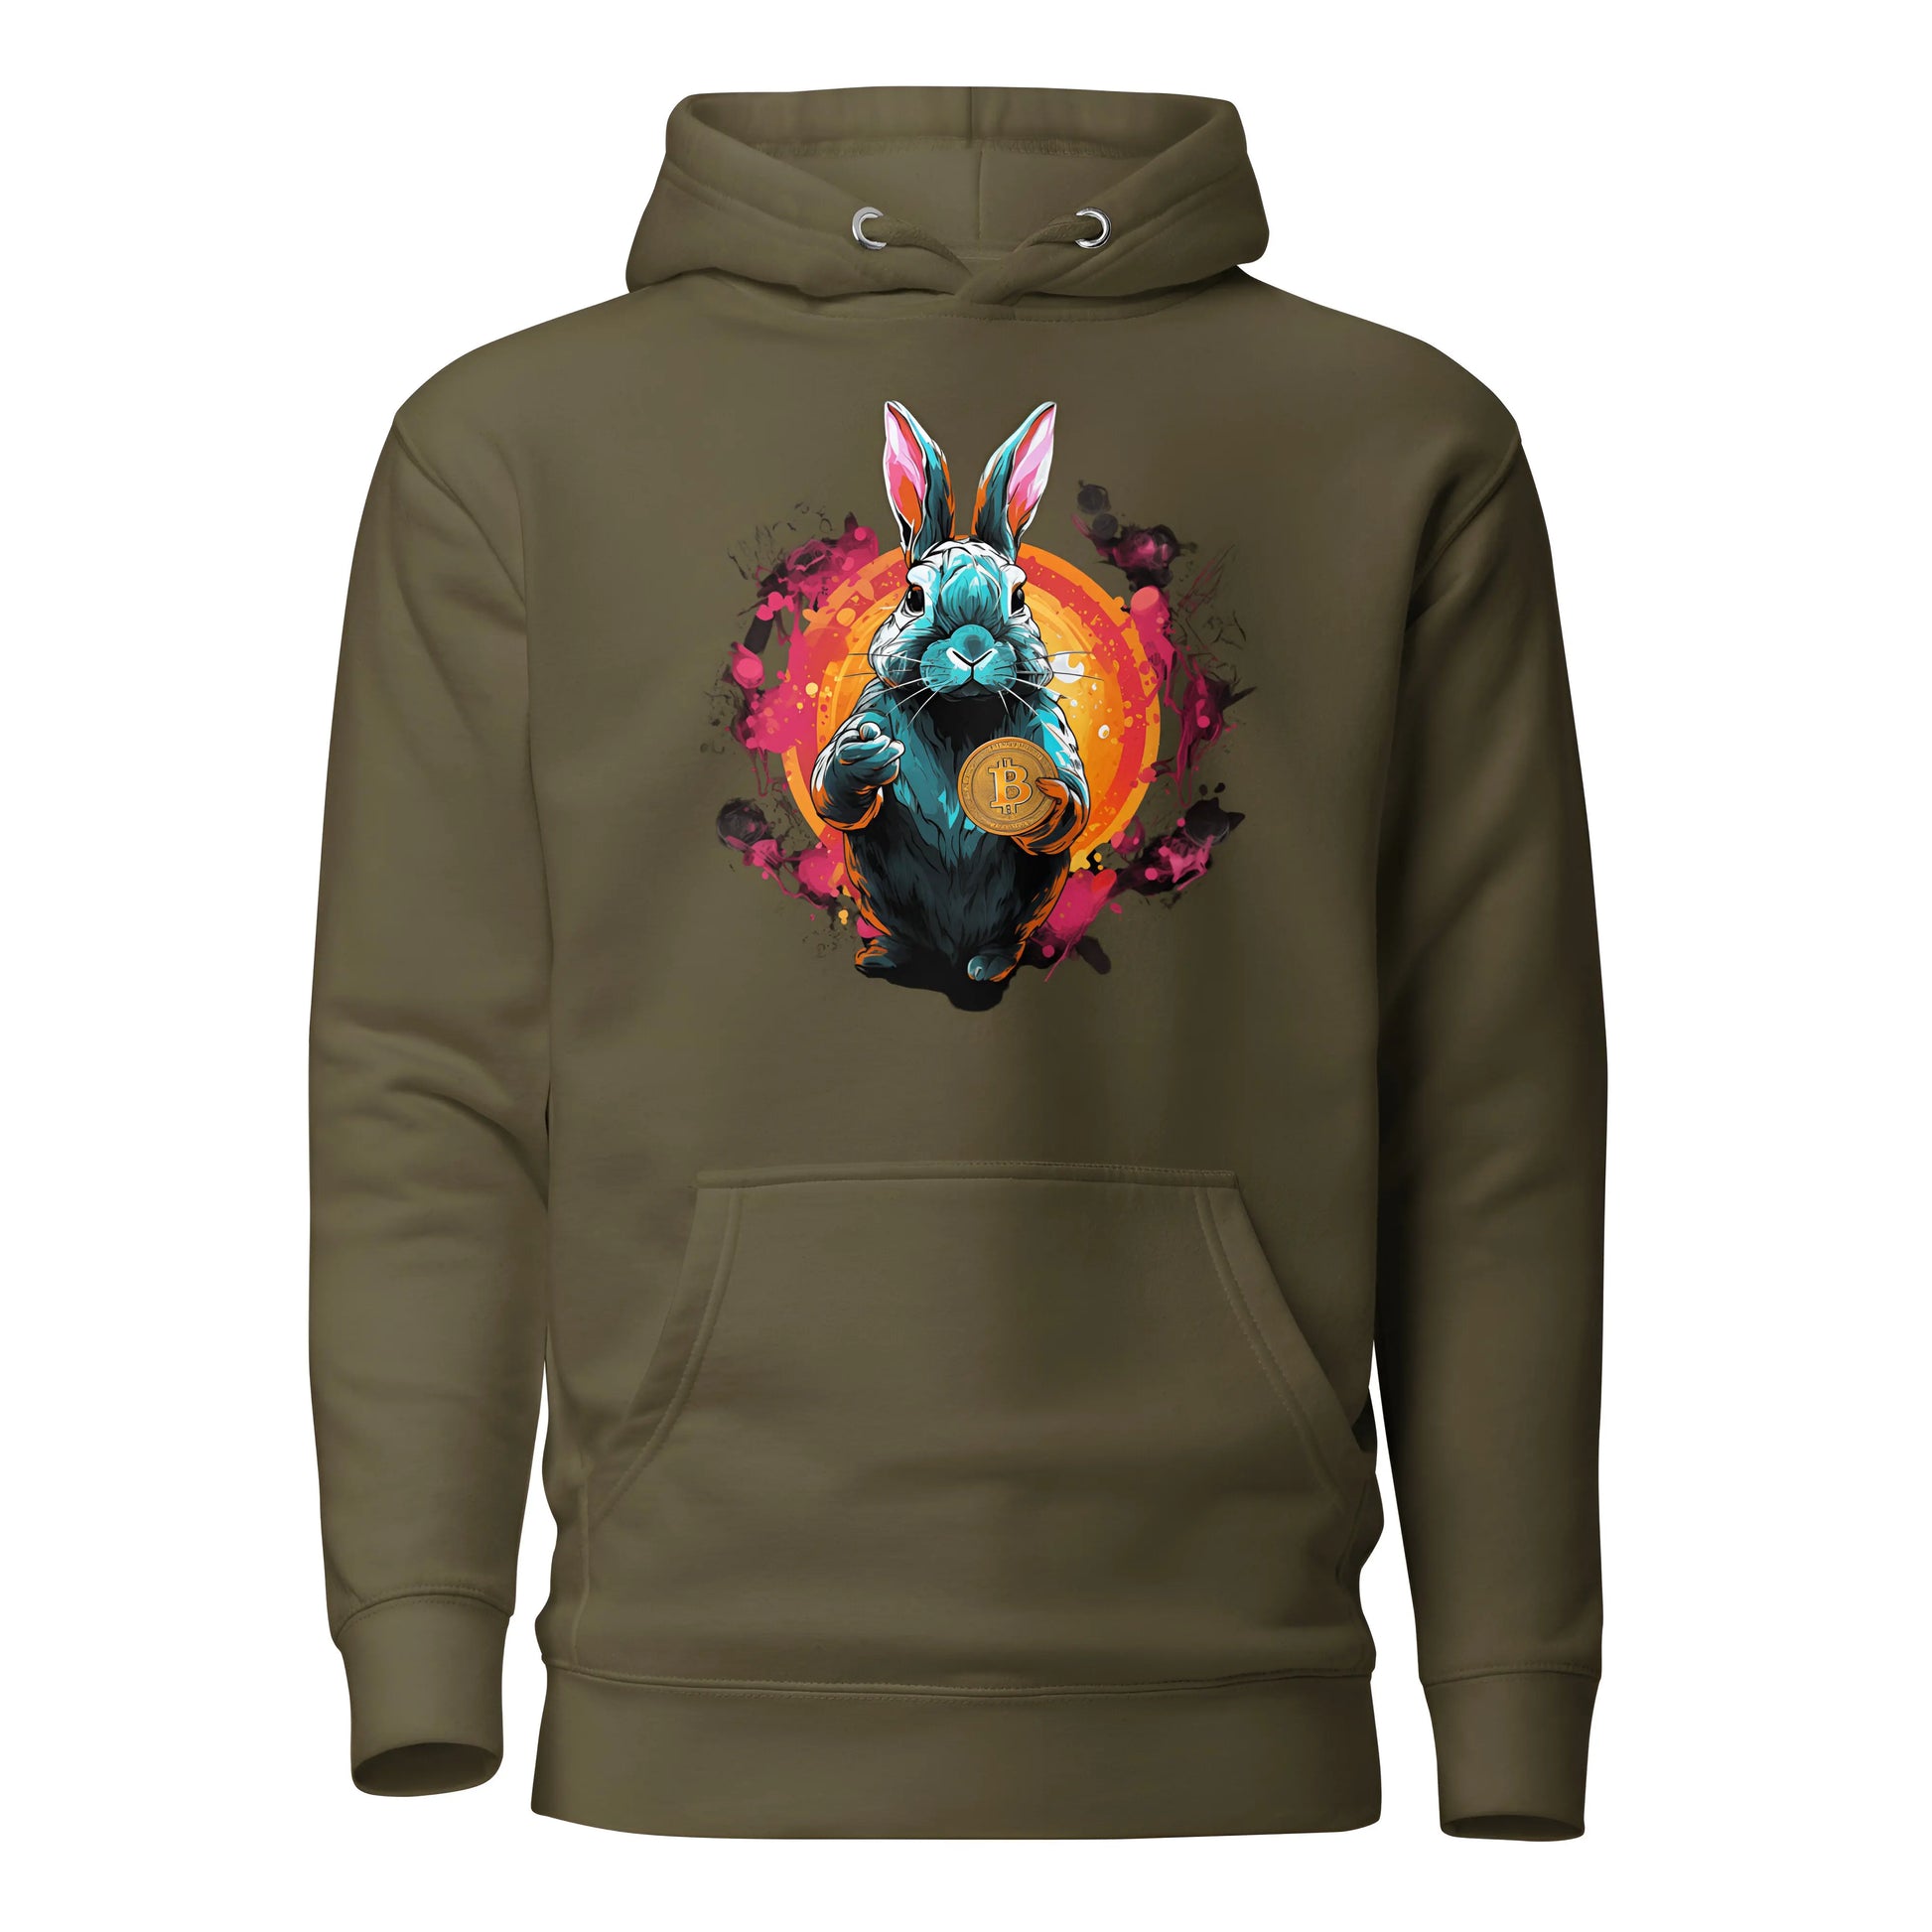 Falling Down The Bitcoin Rabbit Hole - Premium Unisex Bitcoin Hoodie - Join us Too! Military Green Color